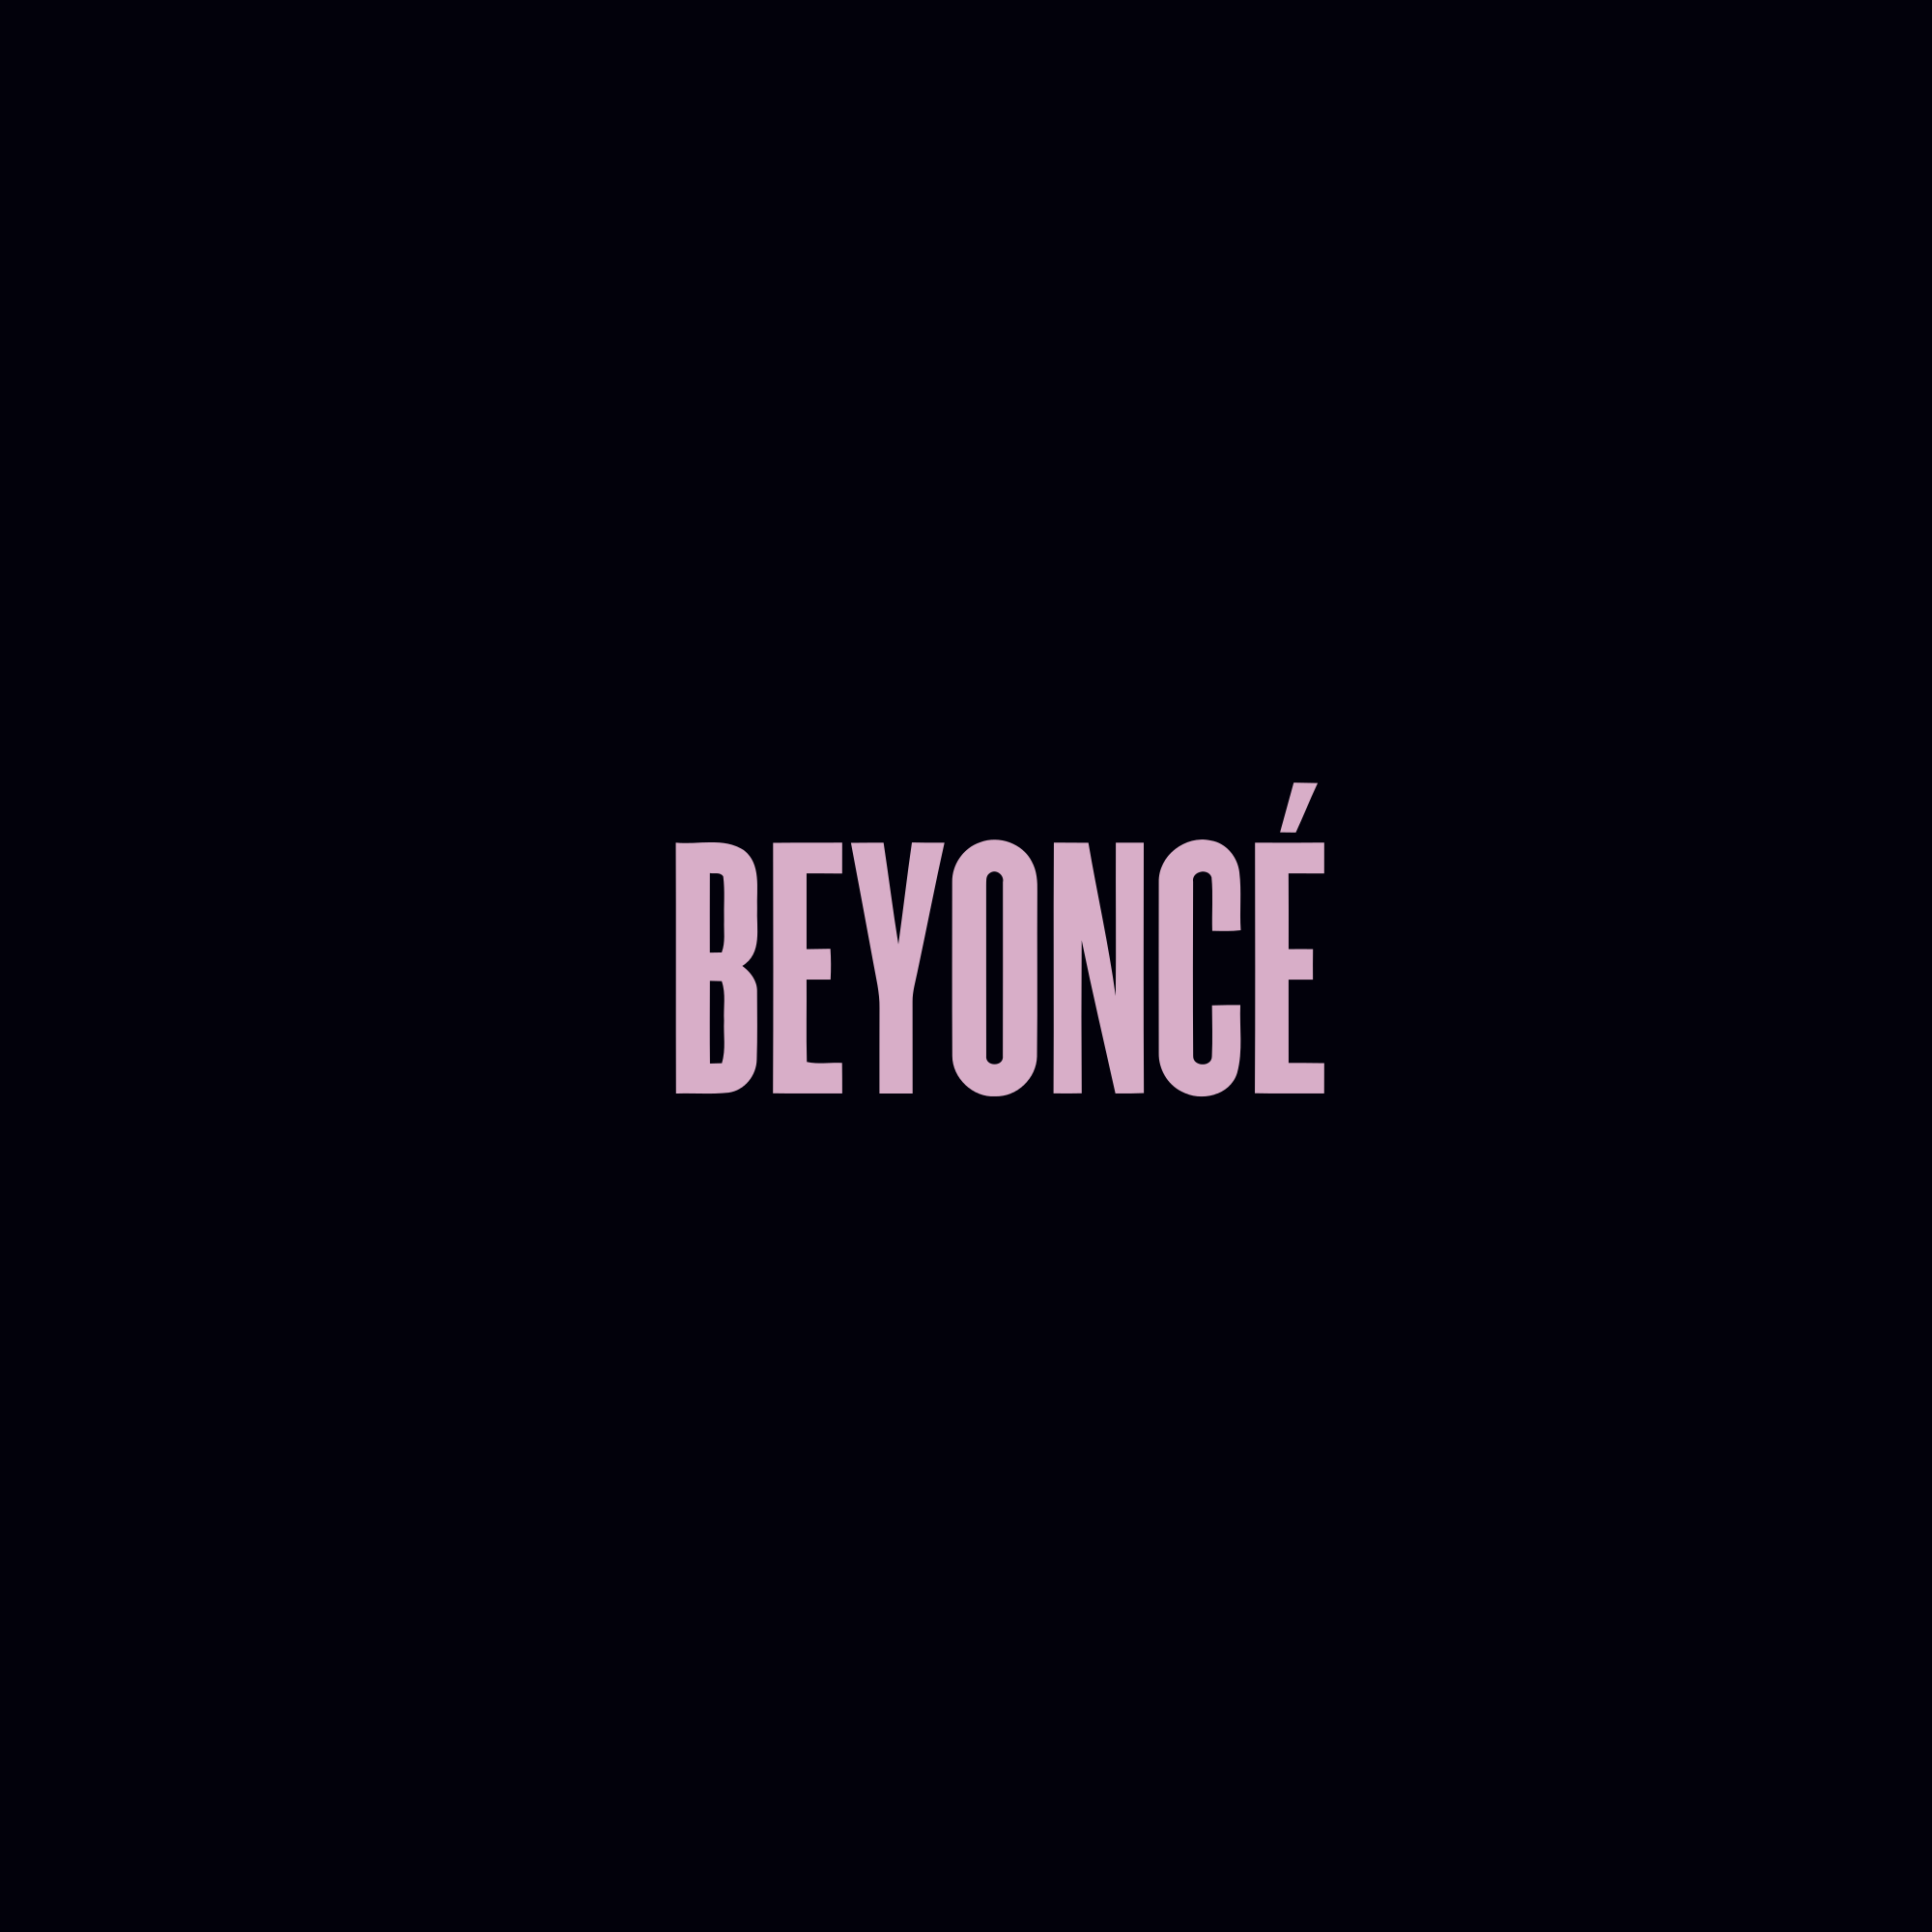  BEYONCE - BEYONCE $43 limited edition visual album double vinyl  dvd with 17 music videos 28 page booklet digital download card 